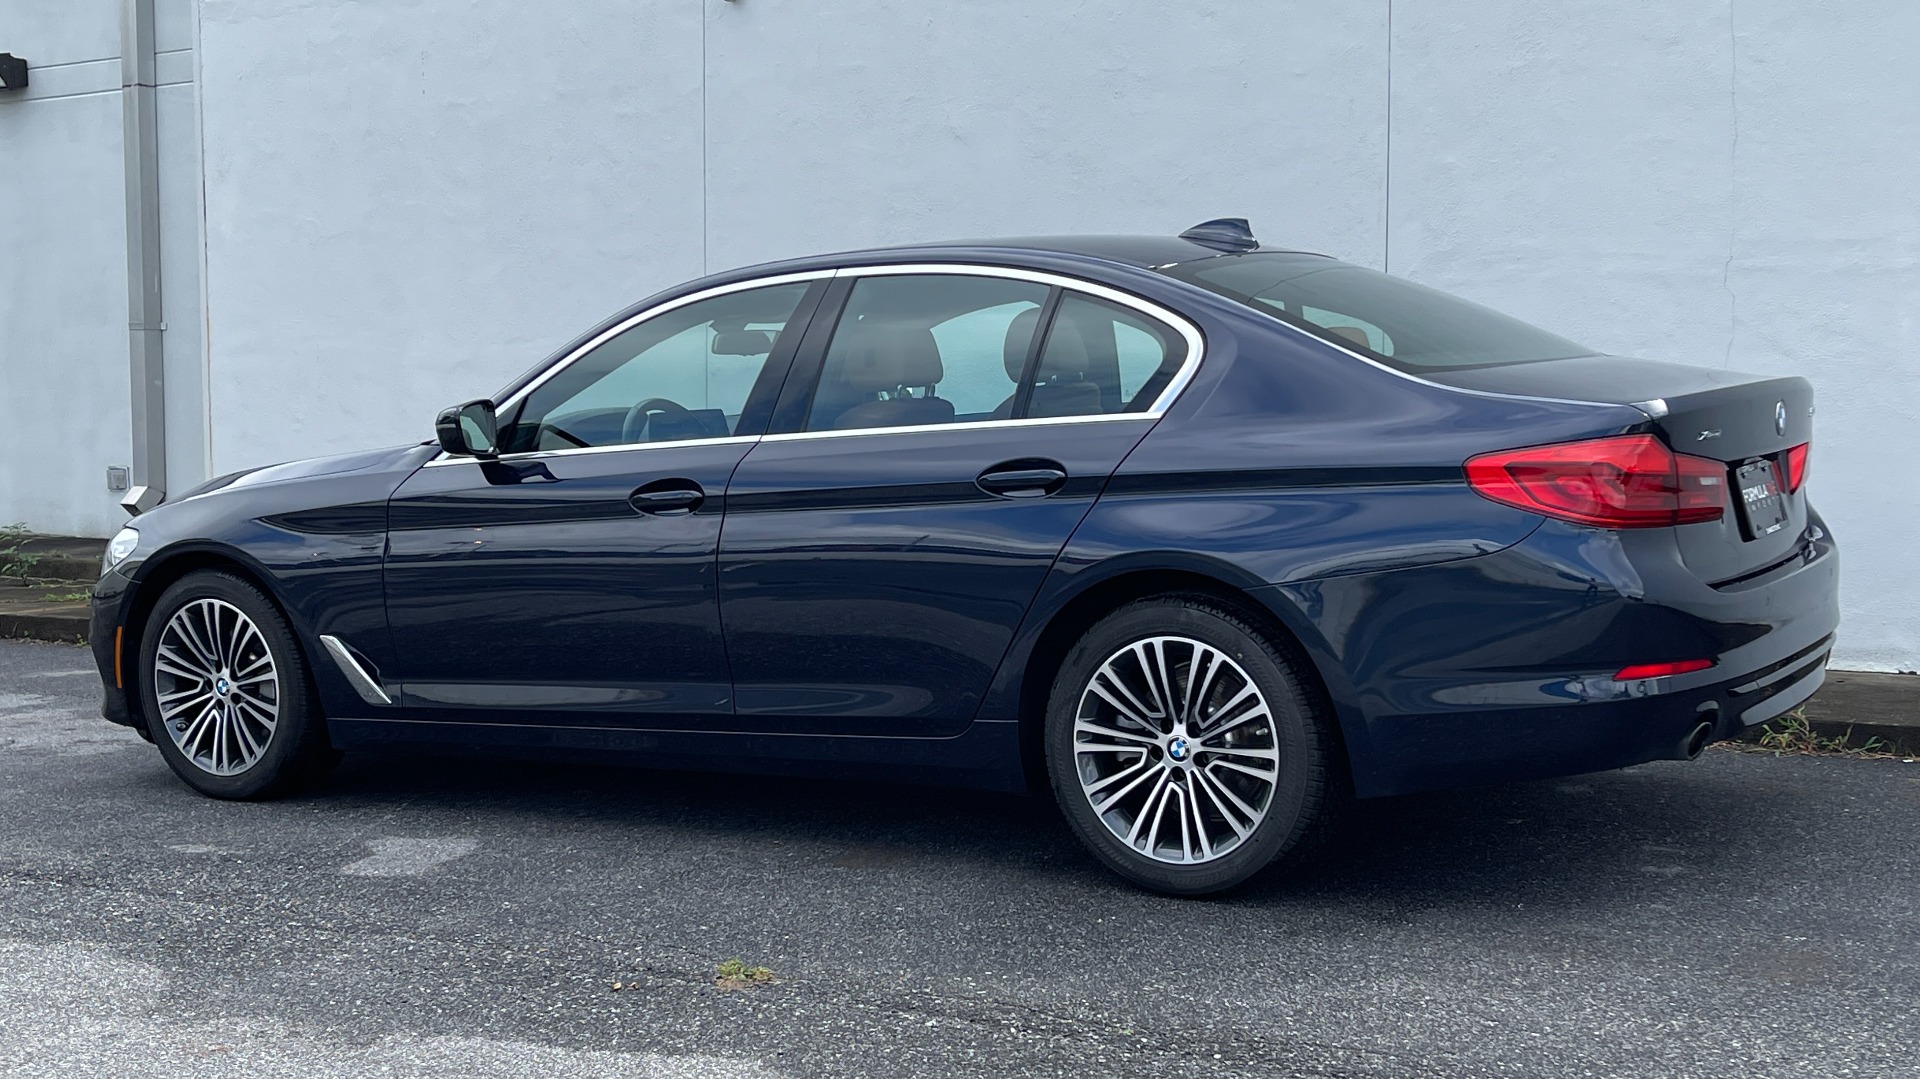 Used 2019 BMW 5 SERIES 530I XDRIVE / CONV PKG / NAV / HUD / HTD STS / SUNROOF / REARVIEW for sale Sold at Formula Imports in Charlotte NC 28227 6